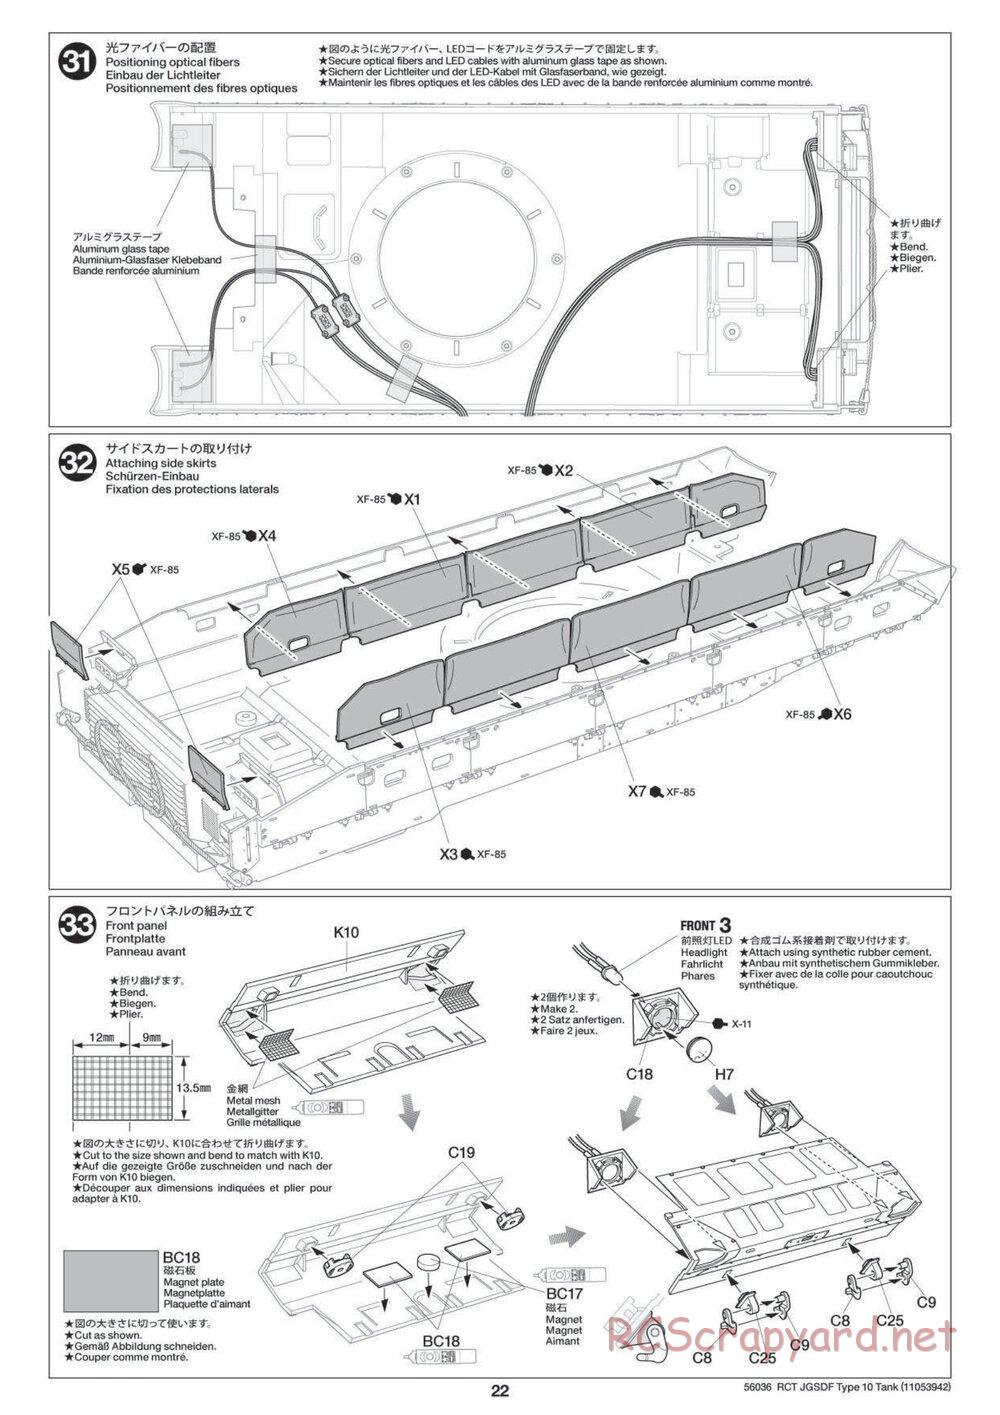 Tamiya - JGSDF Type 10 Tank - 1/16 Scale Chassis - Manual - Page 22